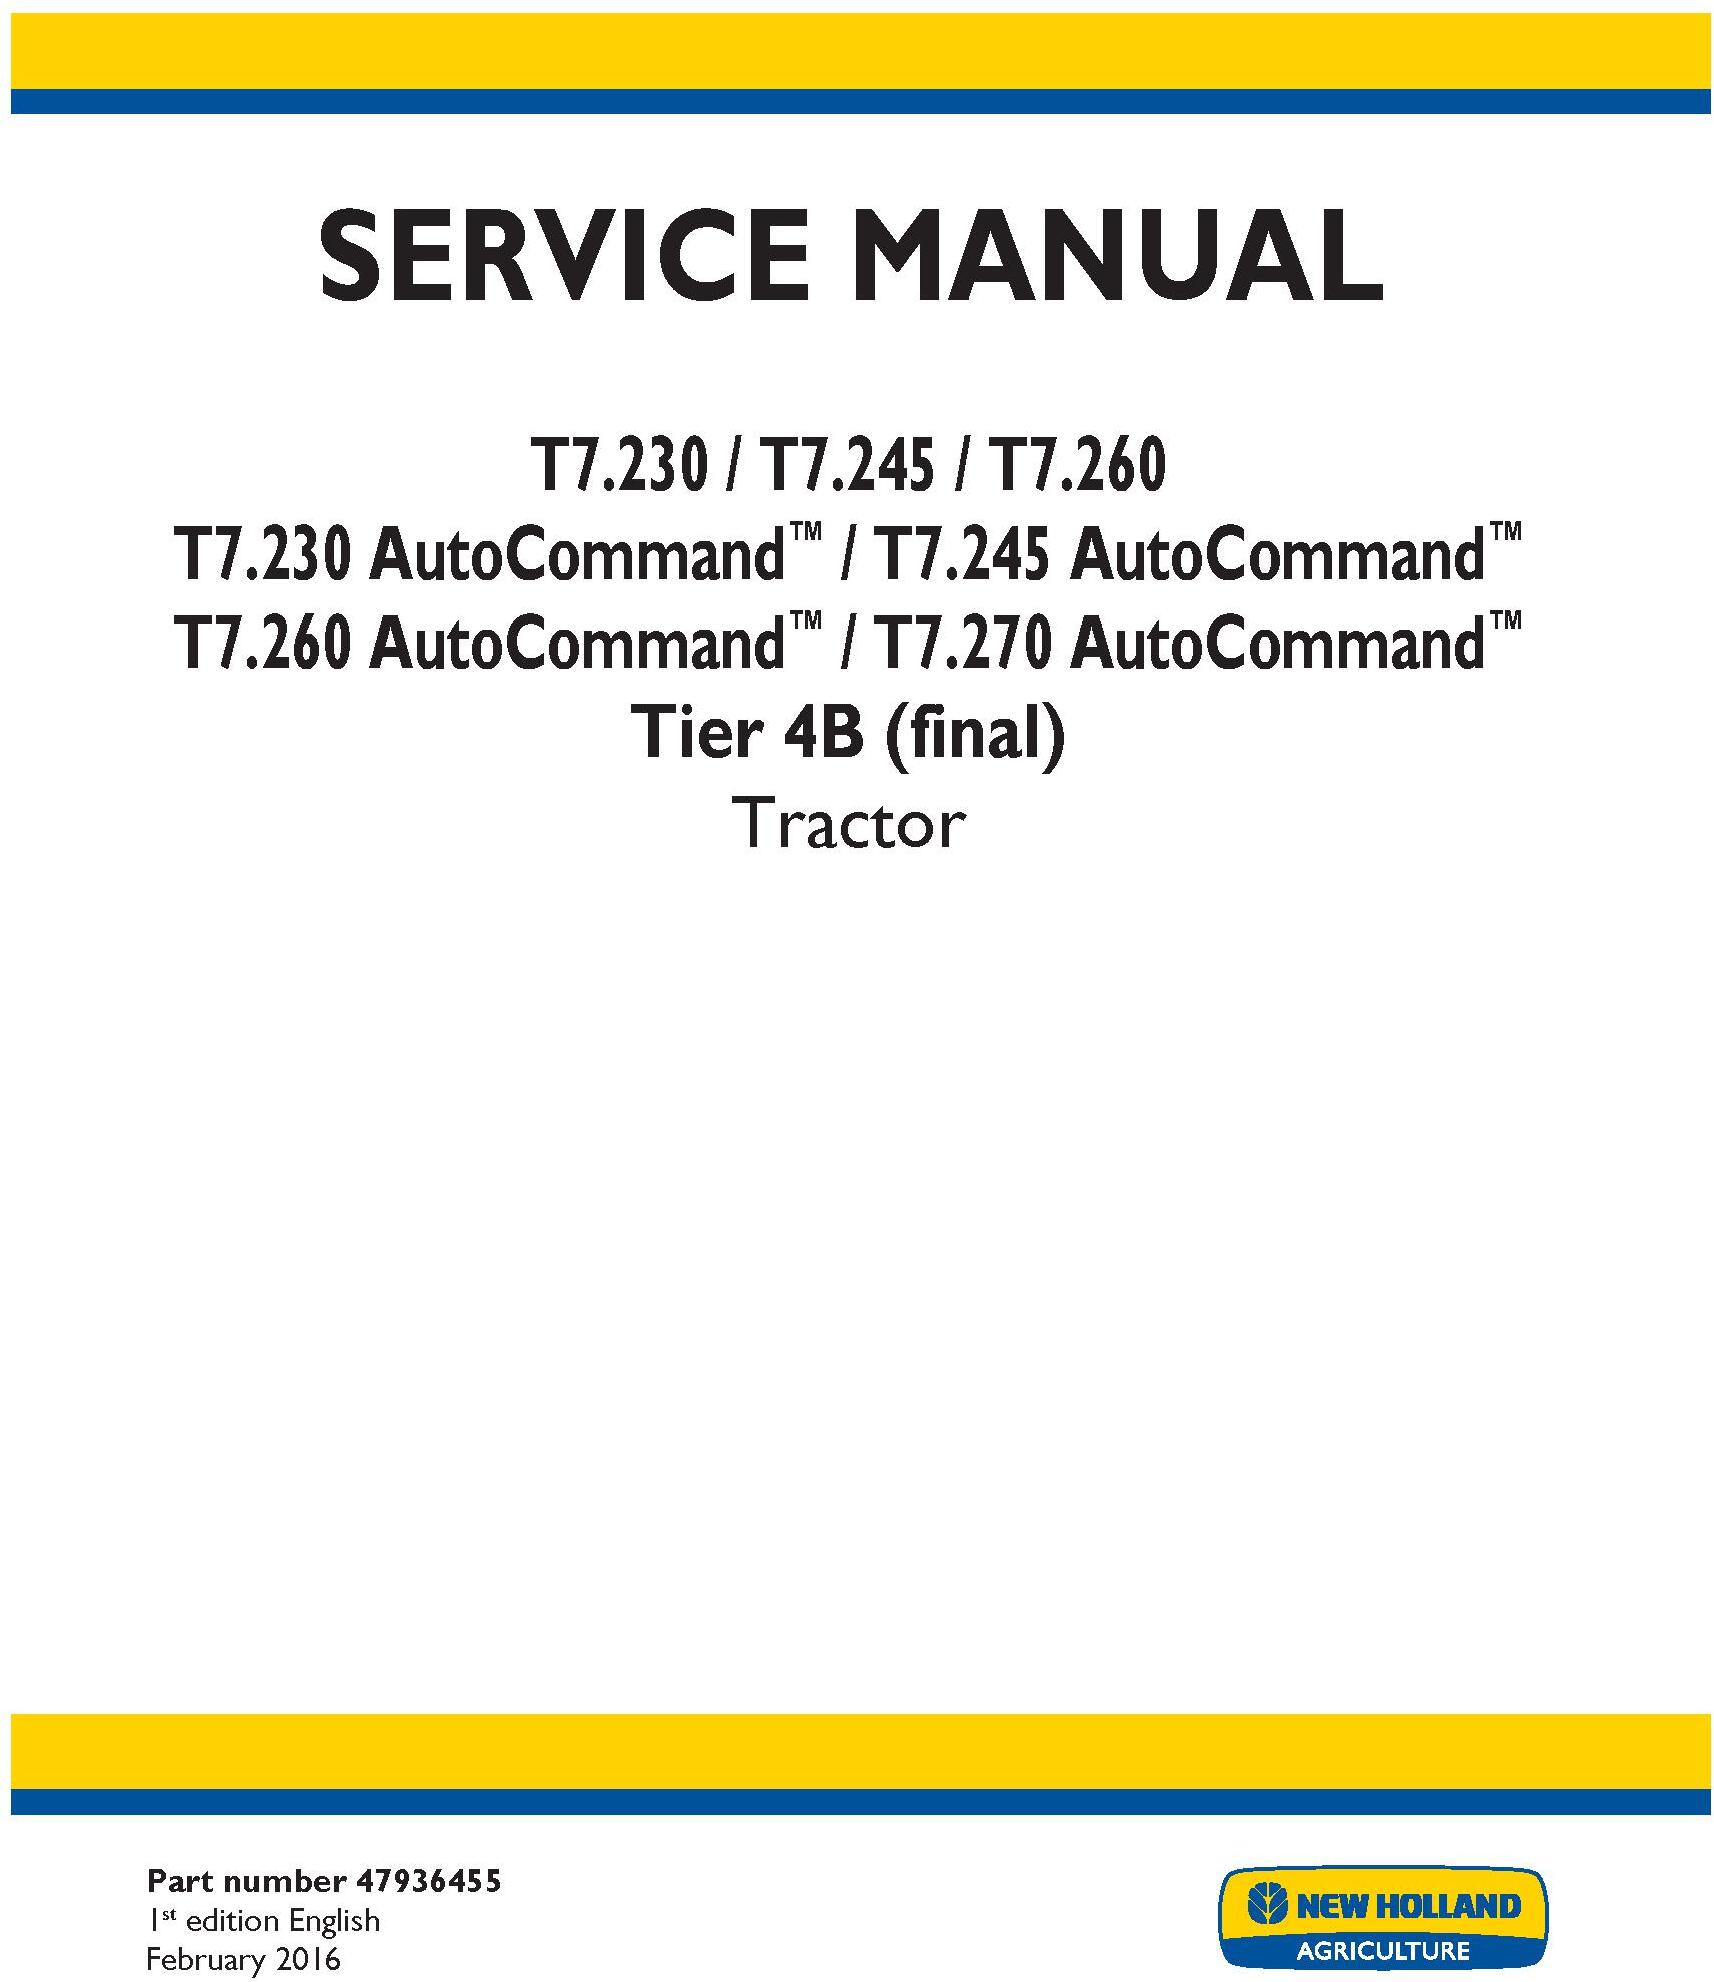 New Holland T7.230, T7.245, T7.260, T7.270 AutoCommand Tier 4B (final) Complete Service Manual (USA) - 19464